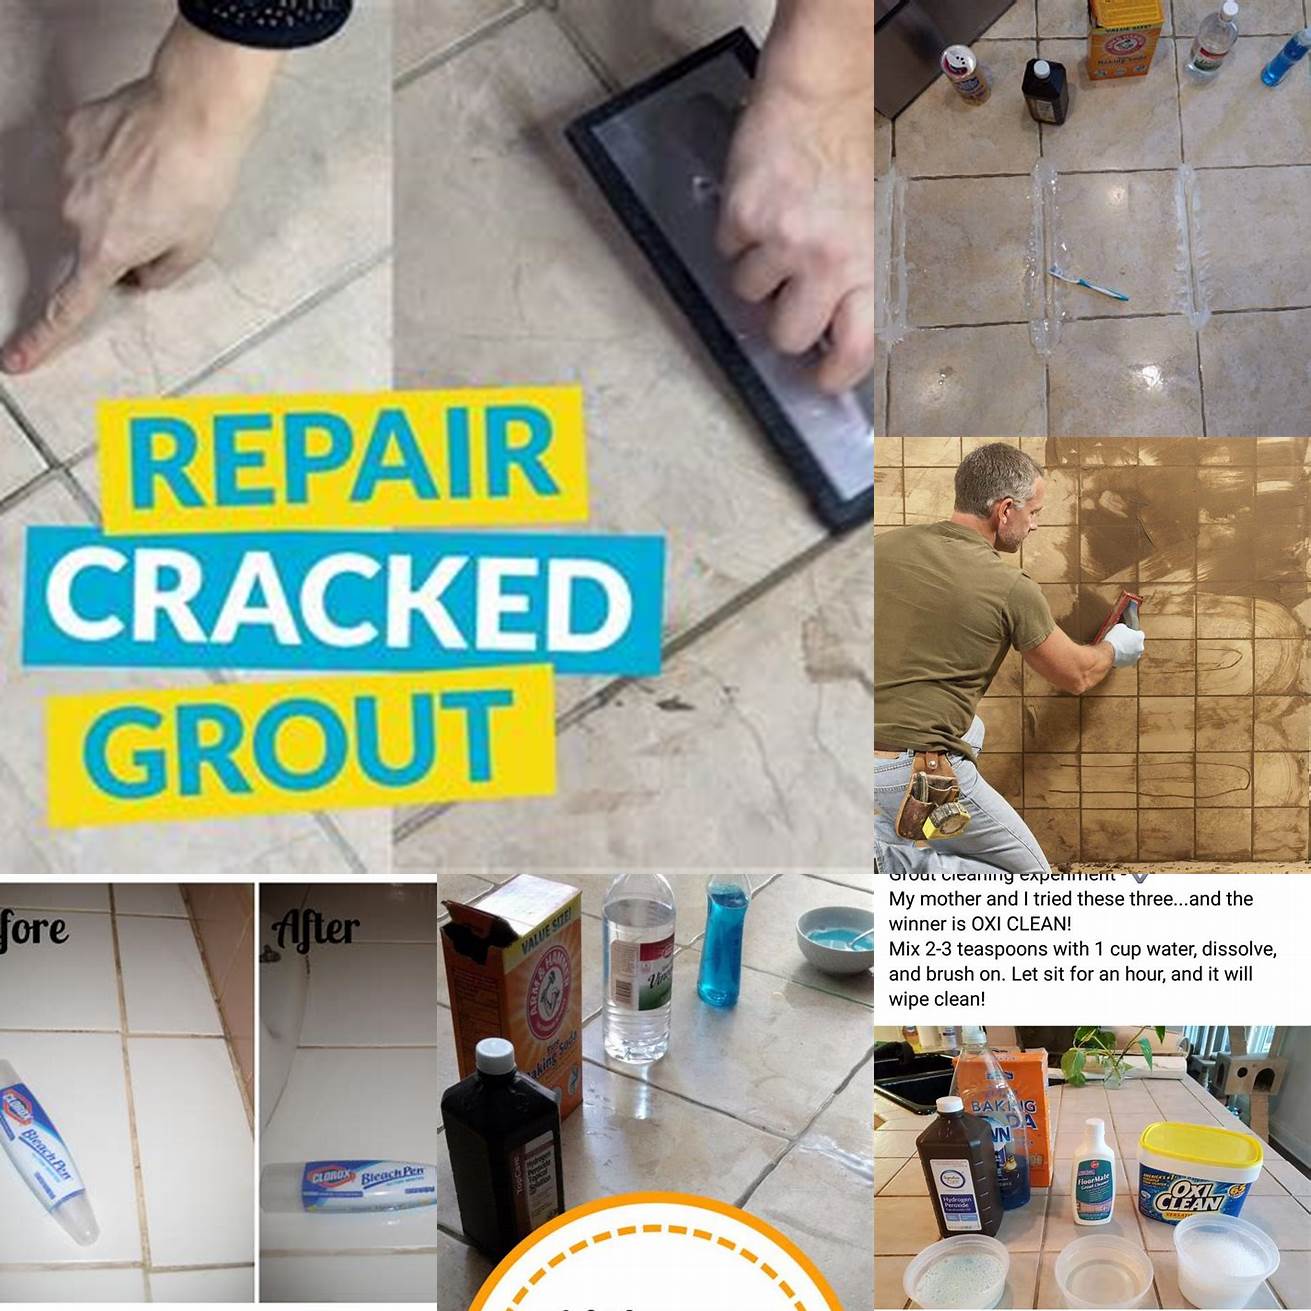 Experiment with Grout